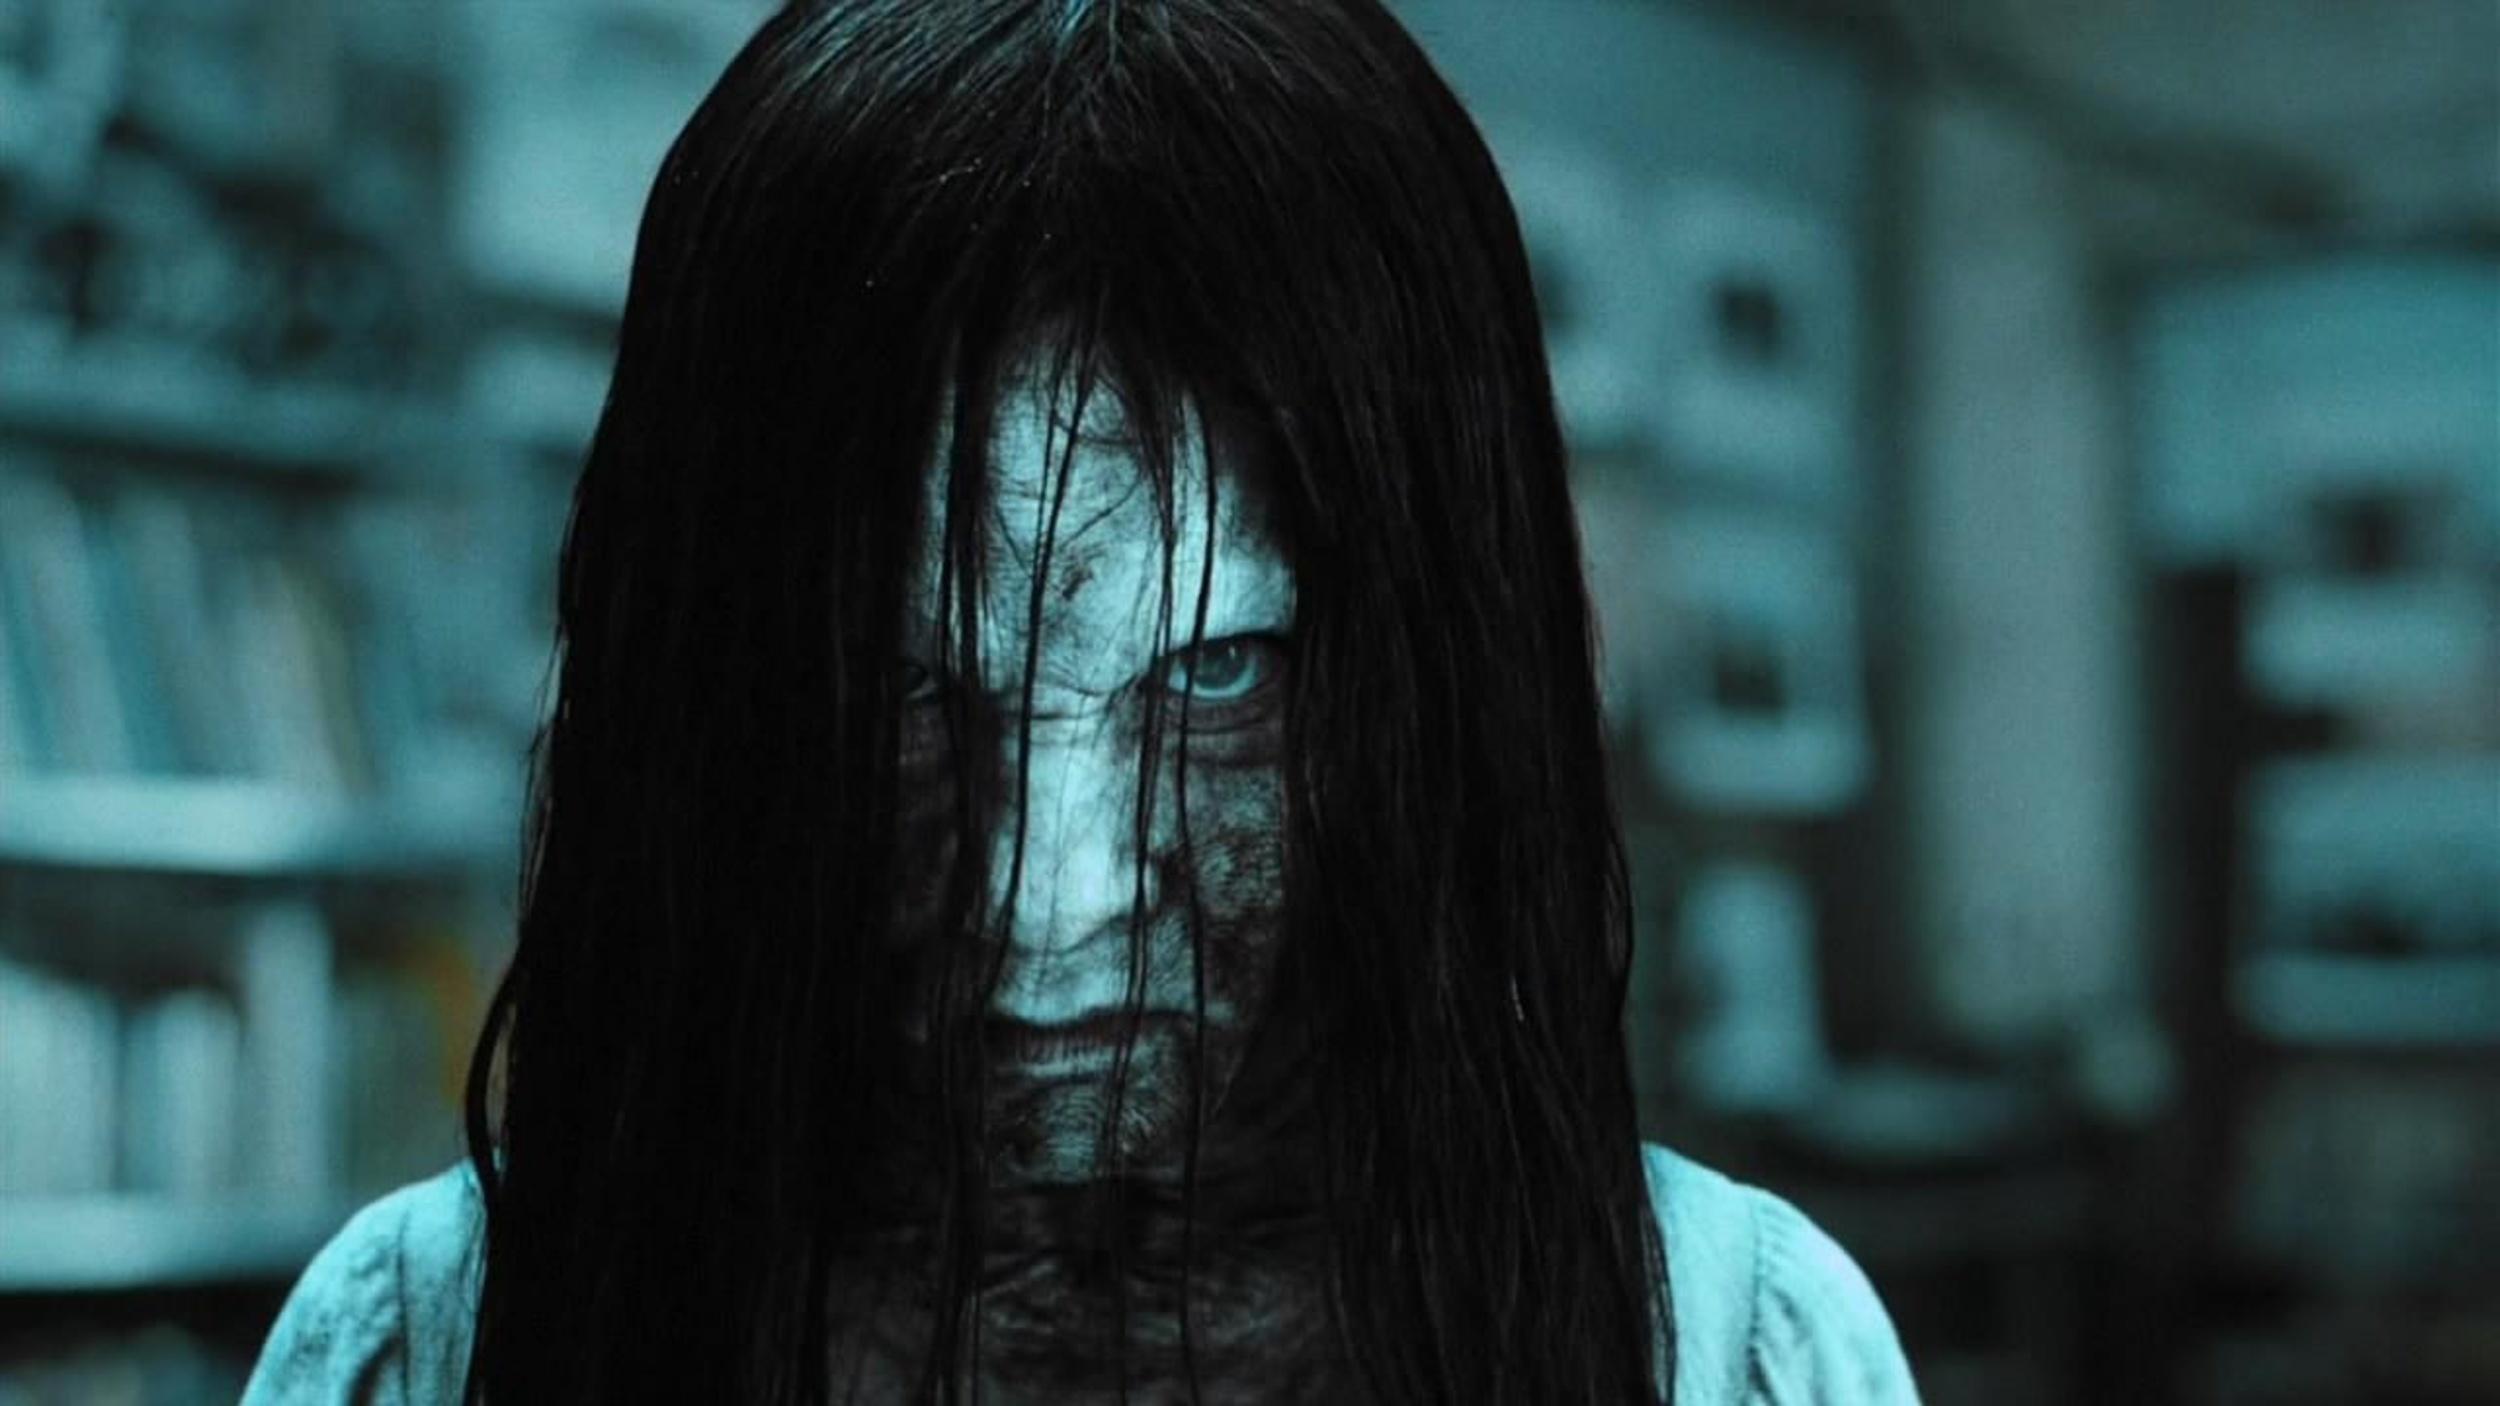 <p>The <em>very </em>rare Hollywood remake that improves on its foreign inspiration, Gore Verbinski’s “The Ring” amps up the terror of Hideo Nakata’s 1998 film by prioritizing mood over narrative coherence (whether that was the intent, and the number of rewrites done on the screenplay would suggest it was not). The Pacific Northwest setting and Samara’s freaky equine influence add two layers of creepiness absent from Nakata’s movie (the ferry scene is incredibly disturbing), while the open-ended conclusion is, thematically, far more intriguing. As for Samara vs. Sadako, they’re both utterly terrifying.</p><p><a href='https://www.msn.com/en-us/community/channel/vid-cj9pqbr0vn9in2b6ddcd8sfgpfq6x6utp44fssrv6mc2gtybw0us'>Did you enjoy this slideshow? Follow us on MSN to see more of our exclusive entertainment content.</a></p>